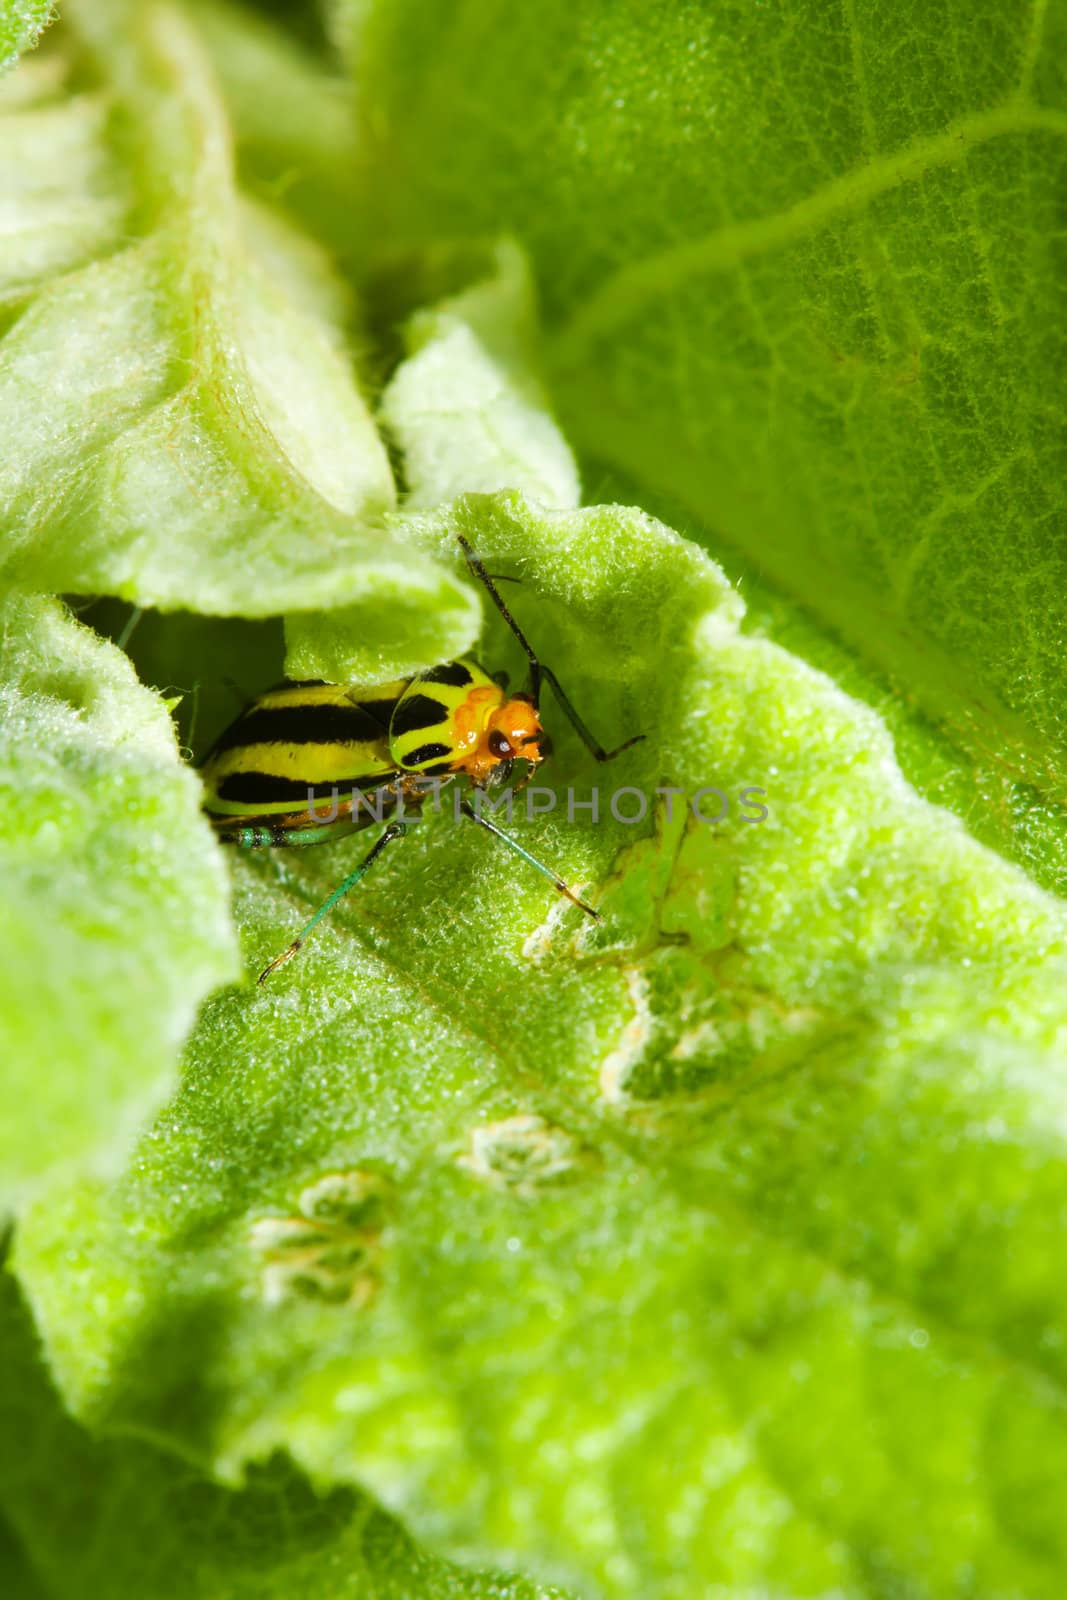 Four Lined Plant Bug hiding in a leaf.